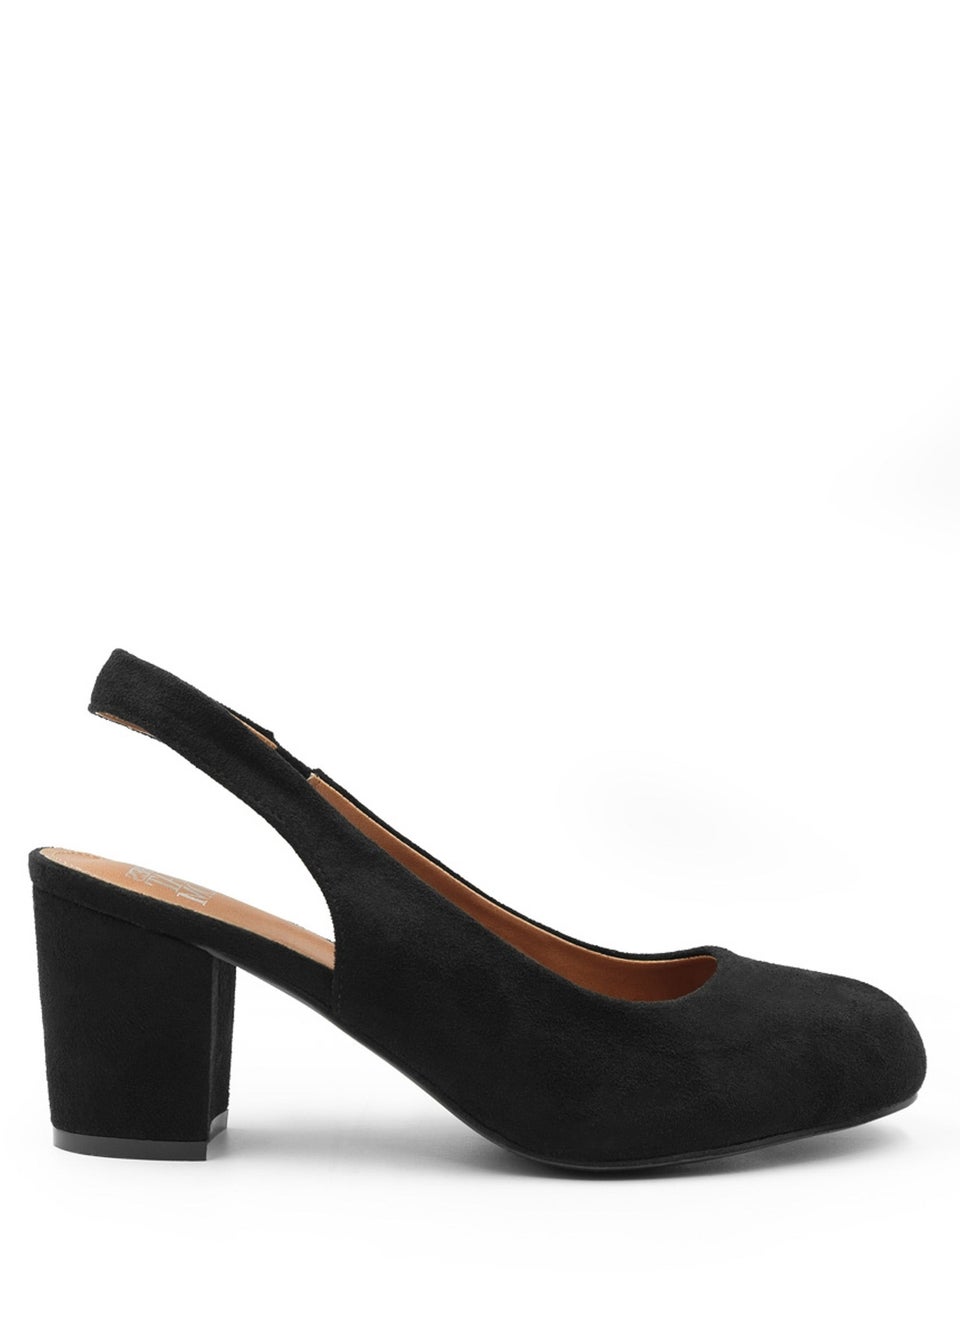 Where's That From Black Suede Edith Block Heel Slingback Shoes